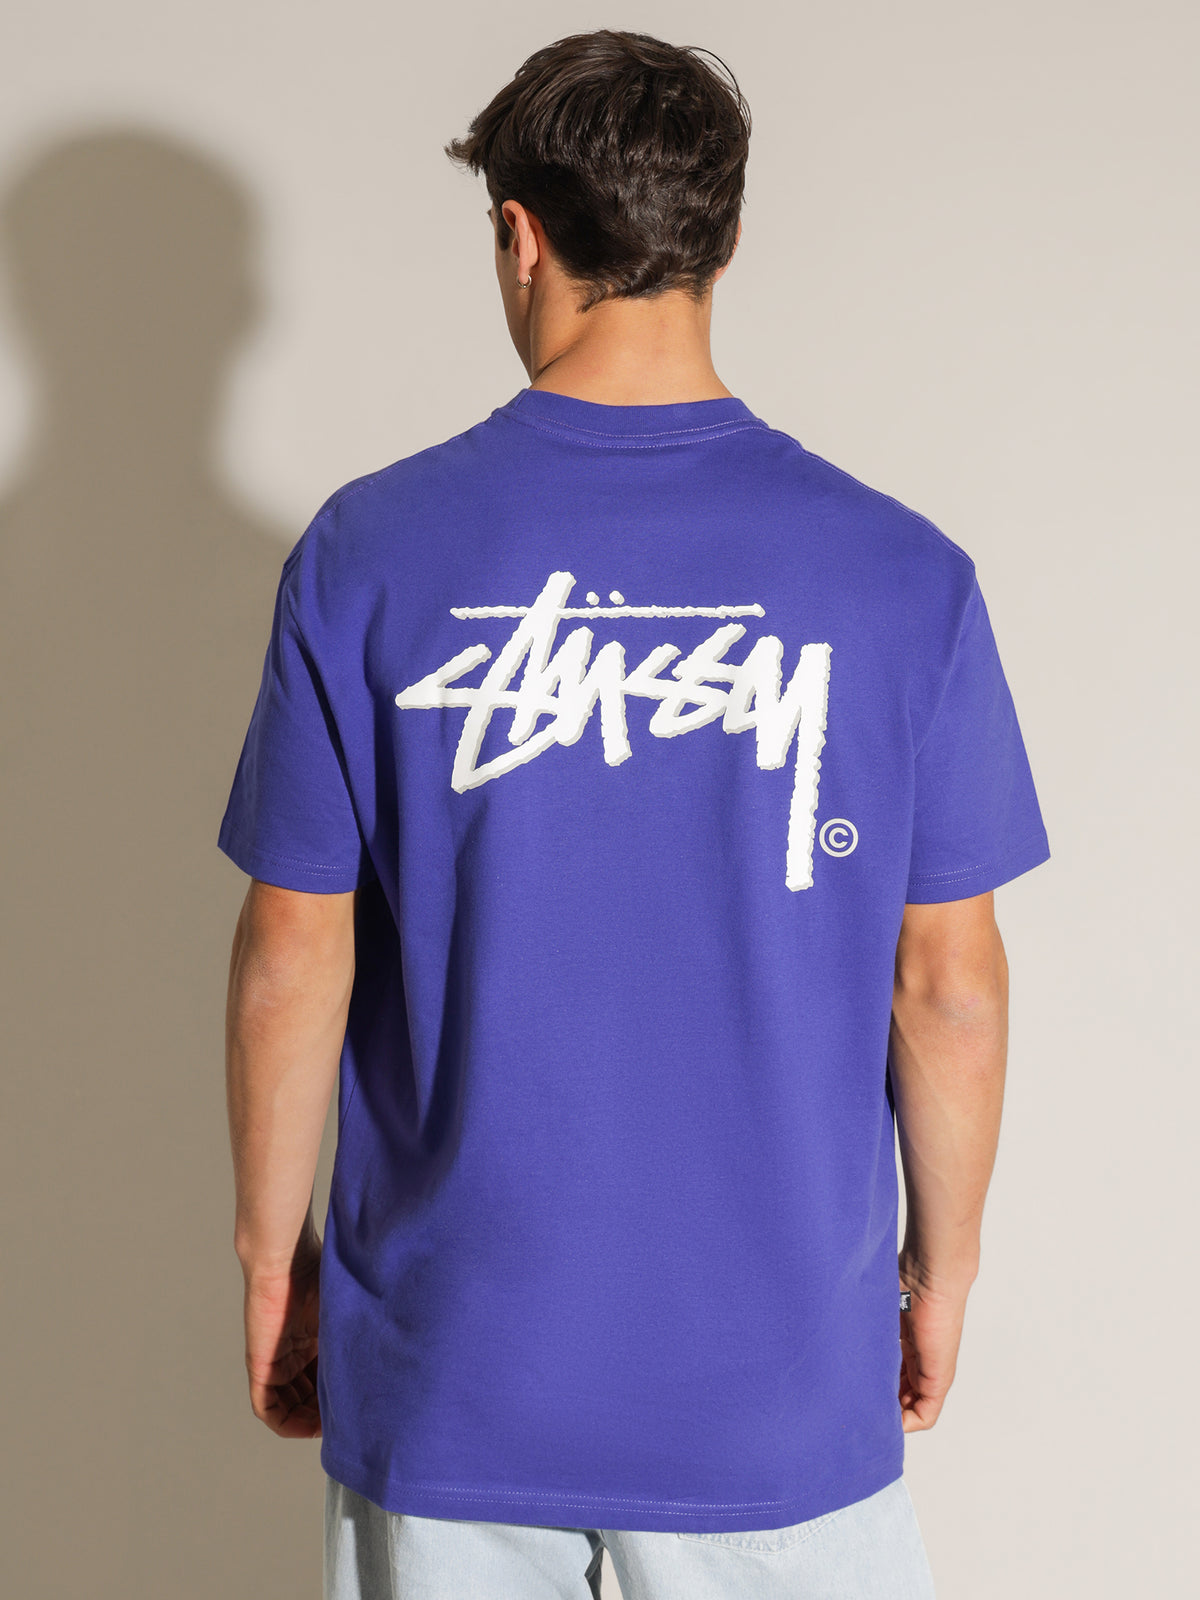 Sold Shadow Stock T-Shirt in Bright Blue